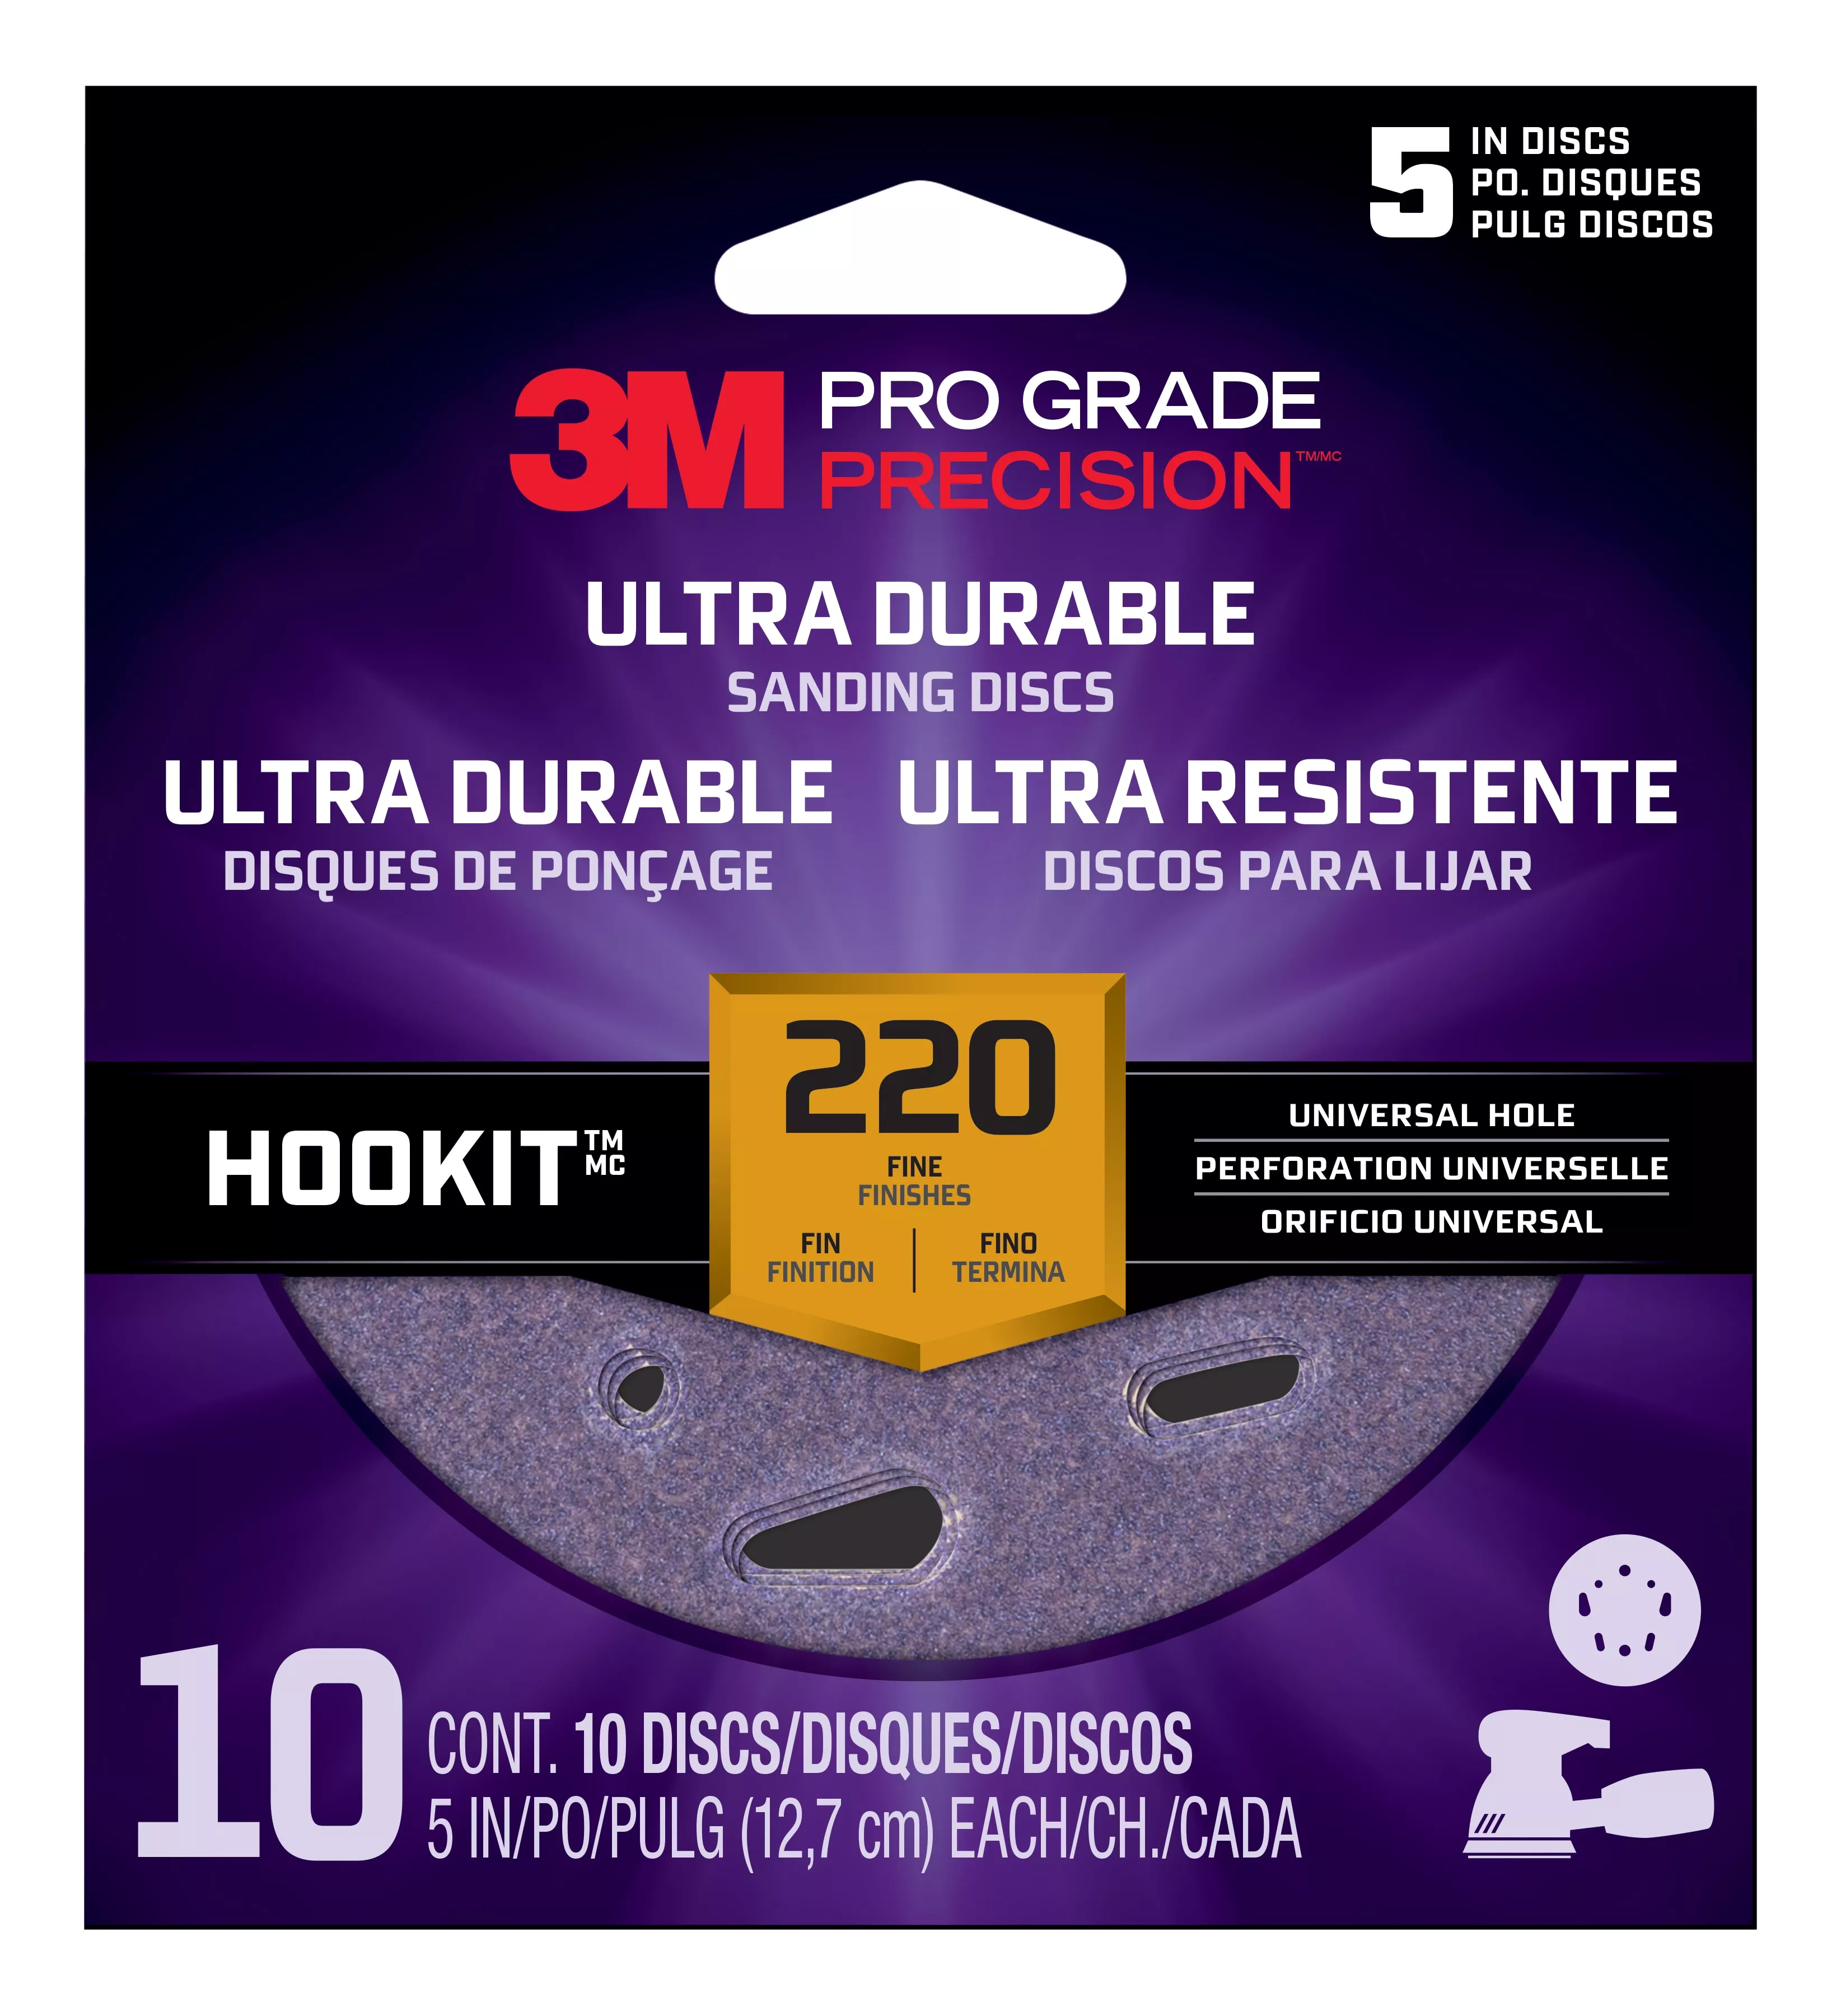 3M™ Pro Grade Precision™ Ultra Durable Universal Hole Sanding Disc,
DUH5220TRI-10T, 5 IN x UH, 220, 10 pack